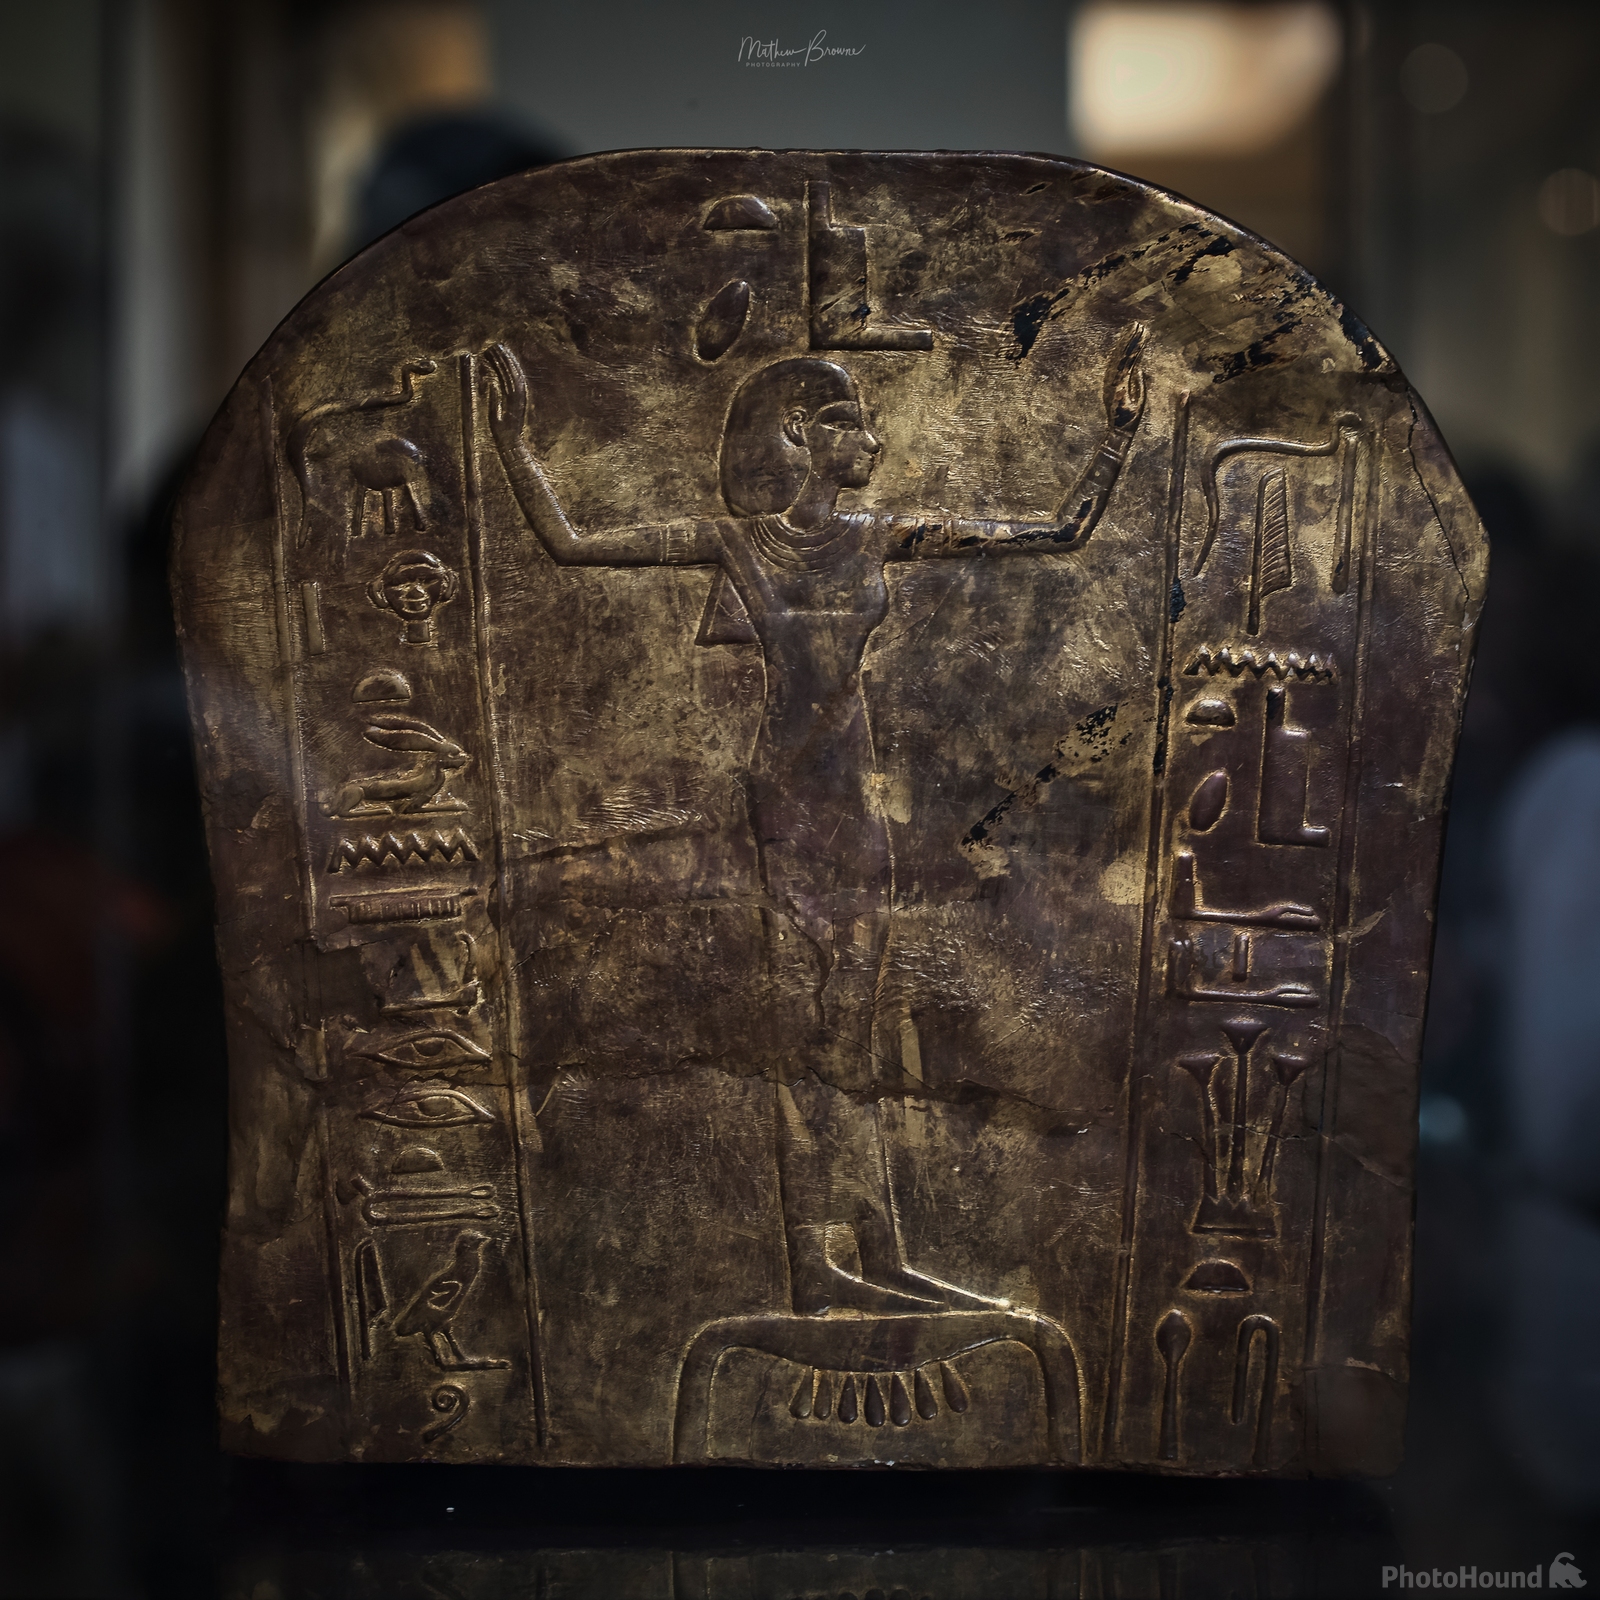 Image of The Egyptian Museum by Mathew Browne